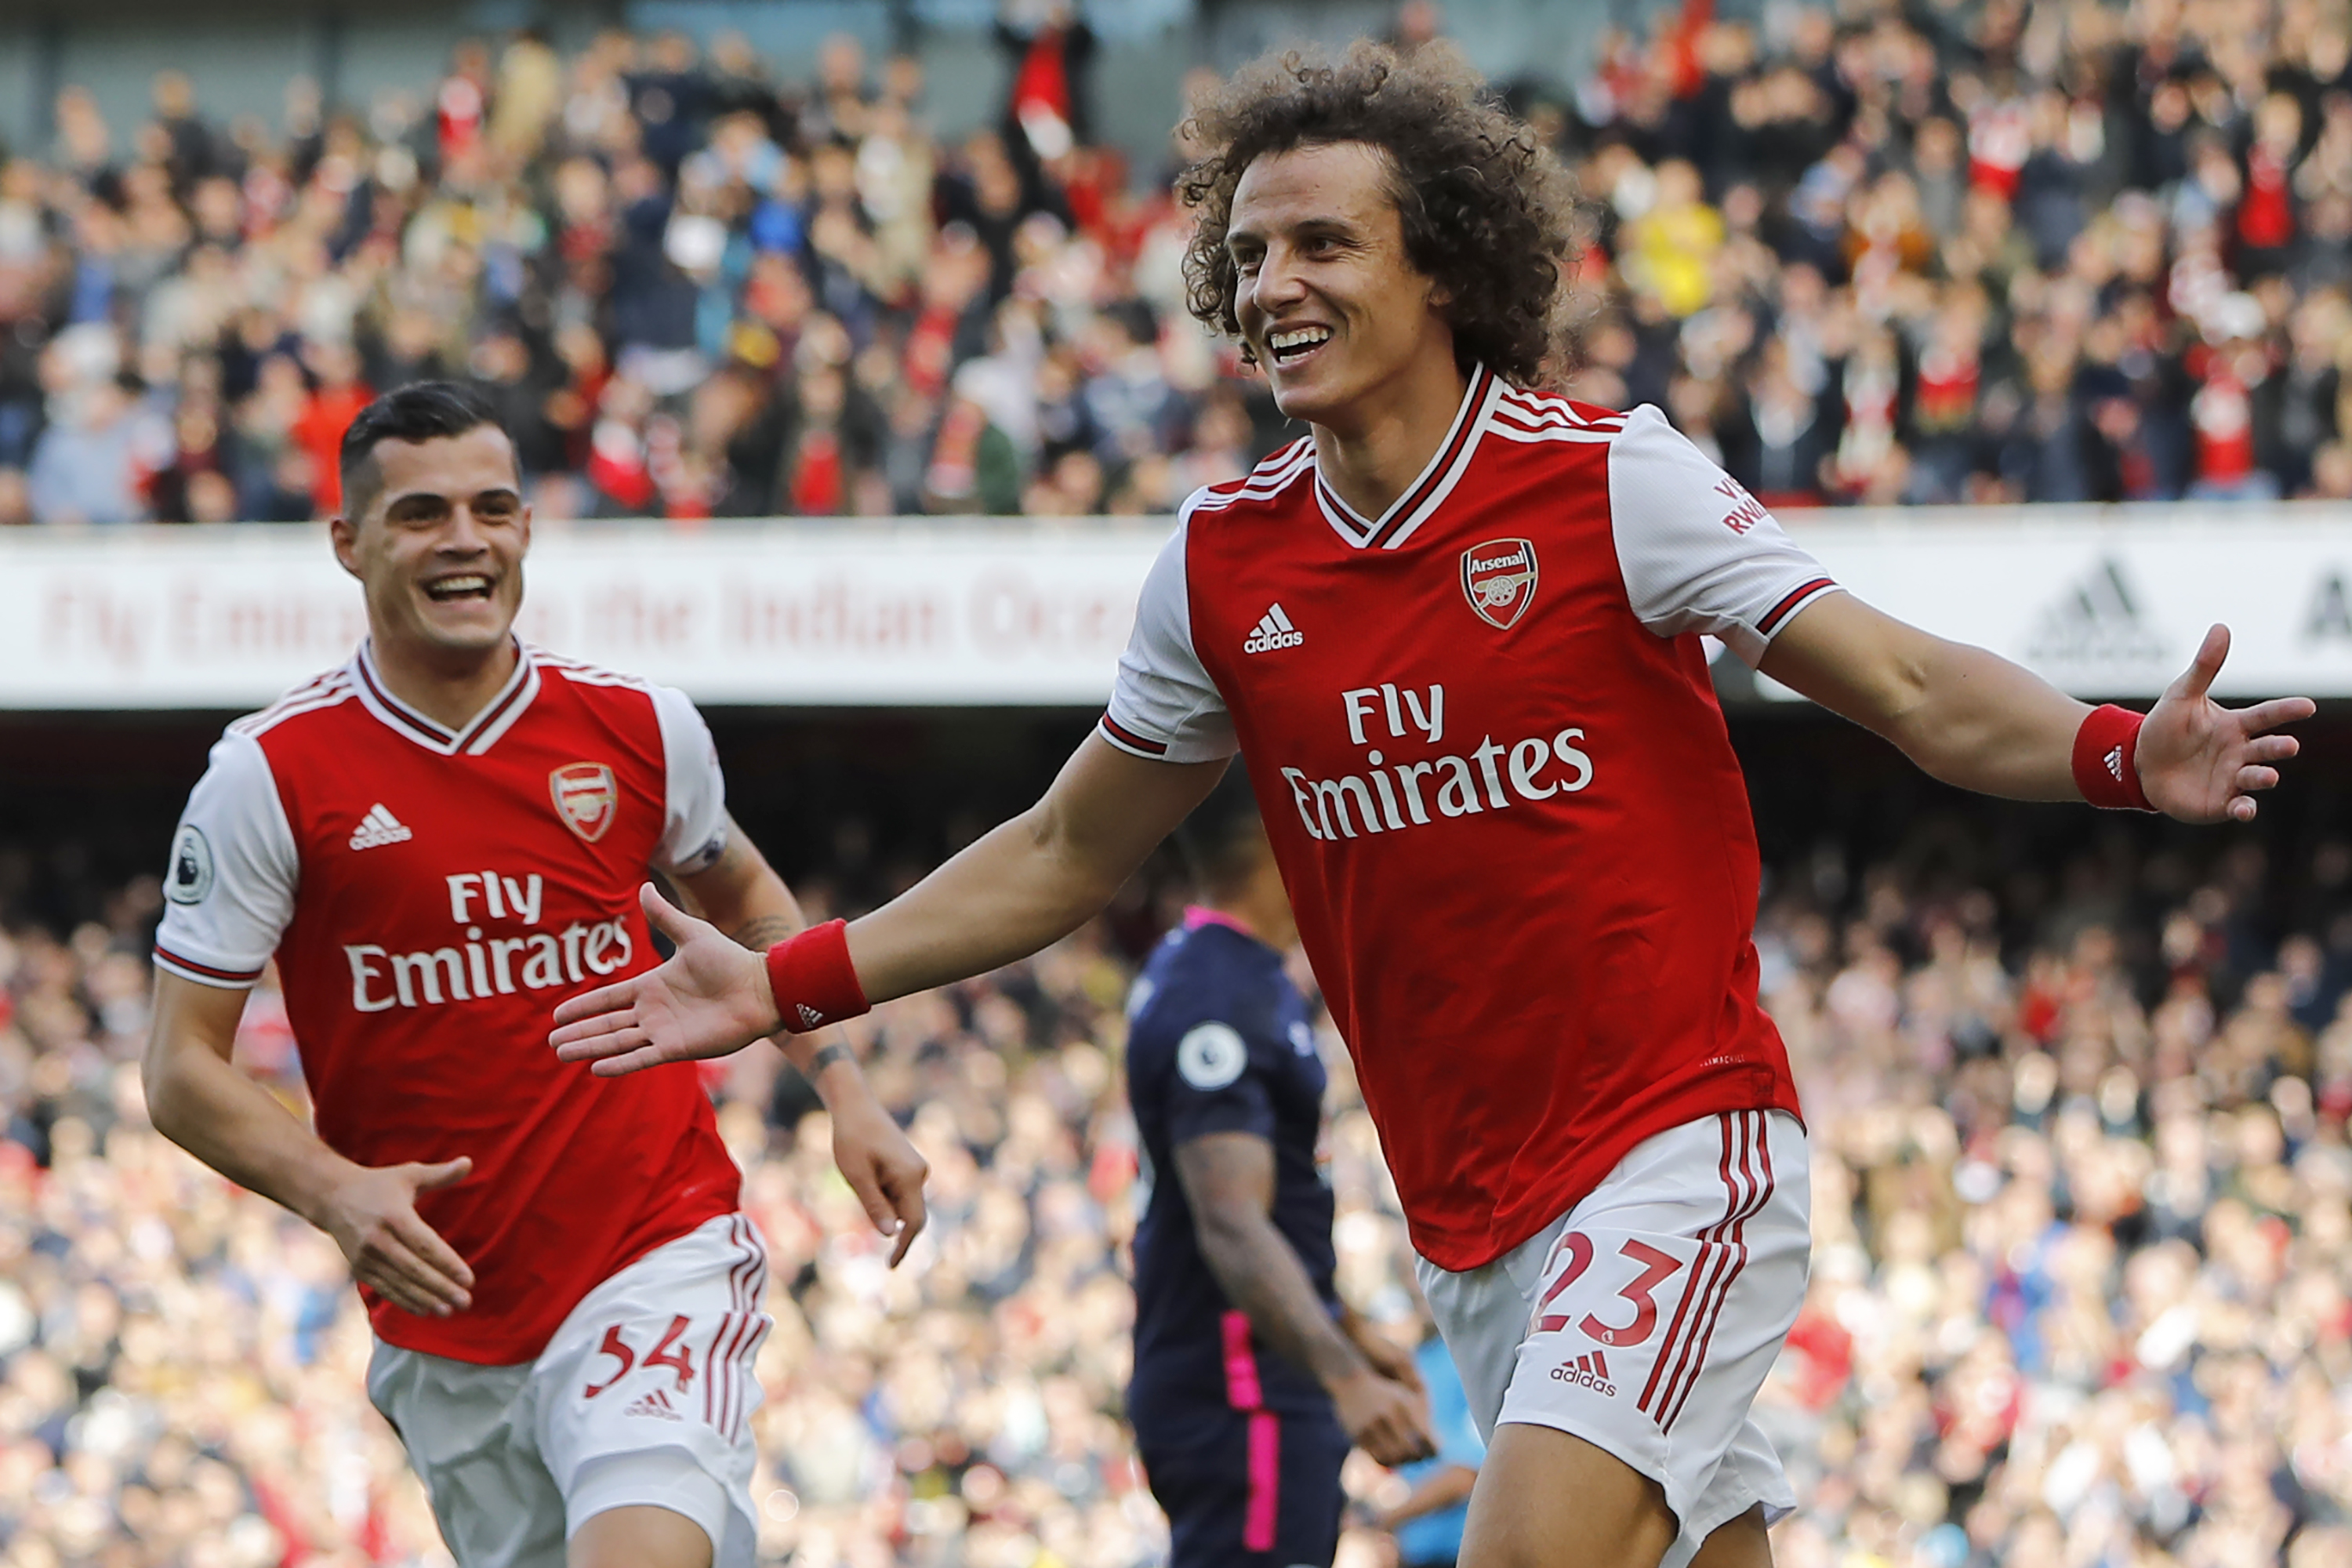 Asenal's Brazilian defender David Luiz (R) celebrates with Arsenal's Swiss midfielder Granit Xhaka (L) after scoring the opening goal of the English Premier League football match between Arsenal and Bournemouth at the Emirates Stadium in London on October 6, 2019. (Photo by Tolga AKMEN / AFP) / RESTRICTED TO EDITORIAL USE. No use with unauthorized audio, video, data, fixture lists, club/league logos or 'live' services. Online in-match use limited to 120 images. An additional 40 images may be used in extra time. No video emulation. Social media in-match use limited to 120 images. An additional 40 images may be used in extra time. No use in betting publications, games or single club/league/player publications. /  (Photo by TOLGA AKMEN/AFP via Getty Images)